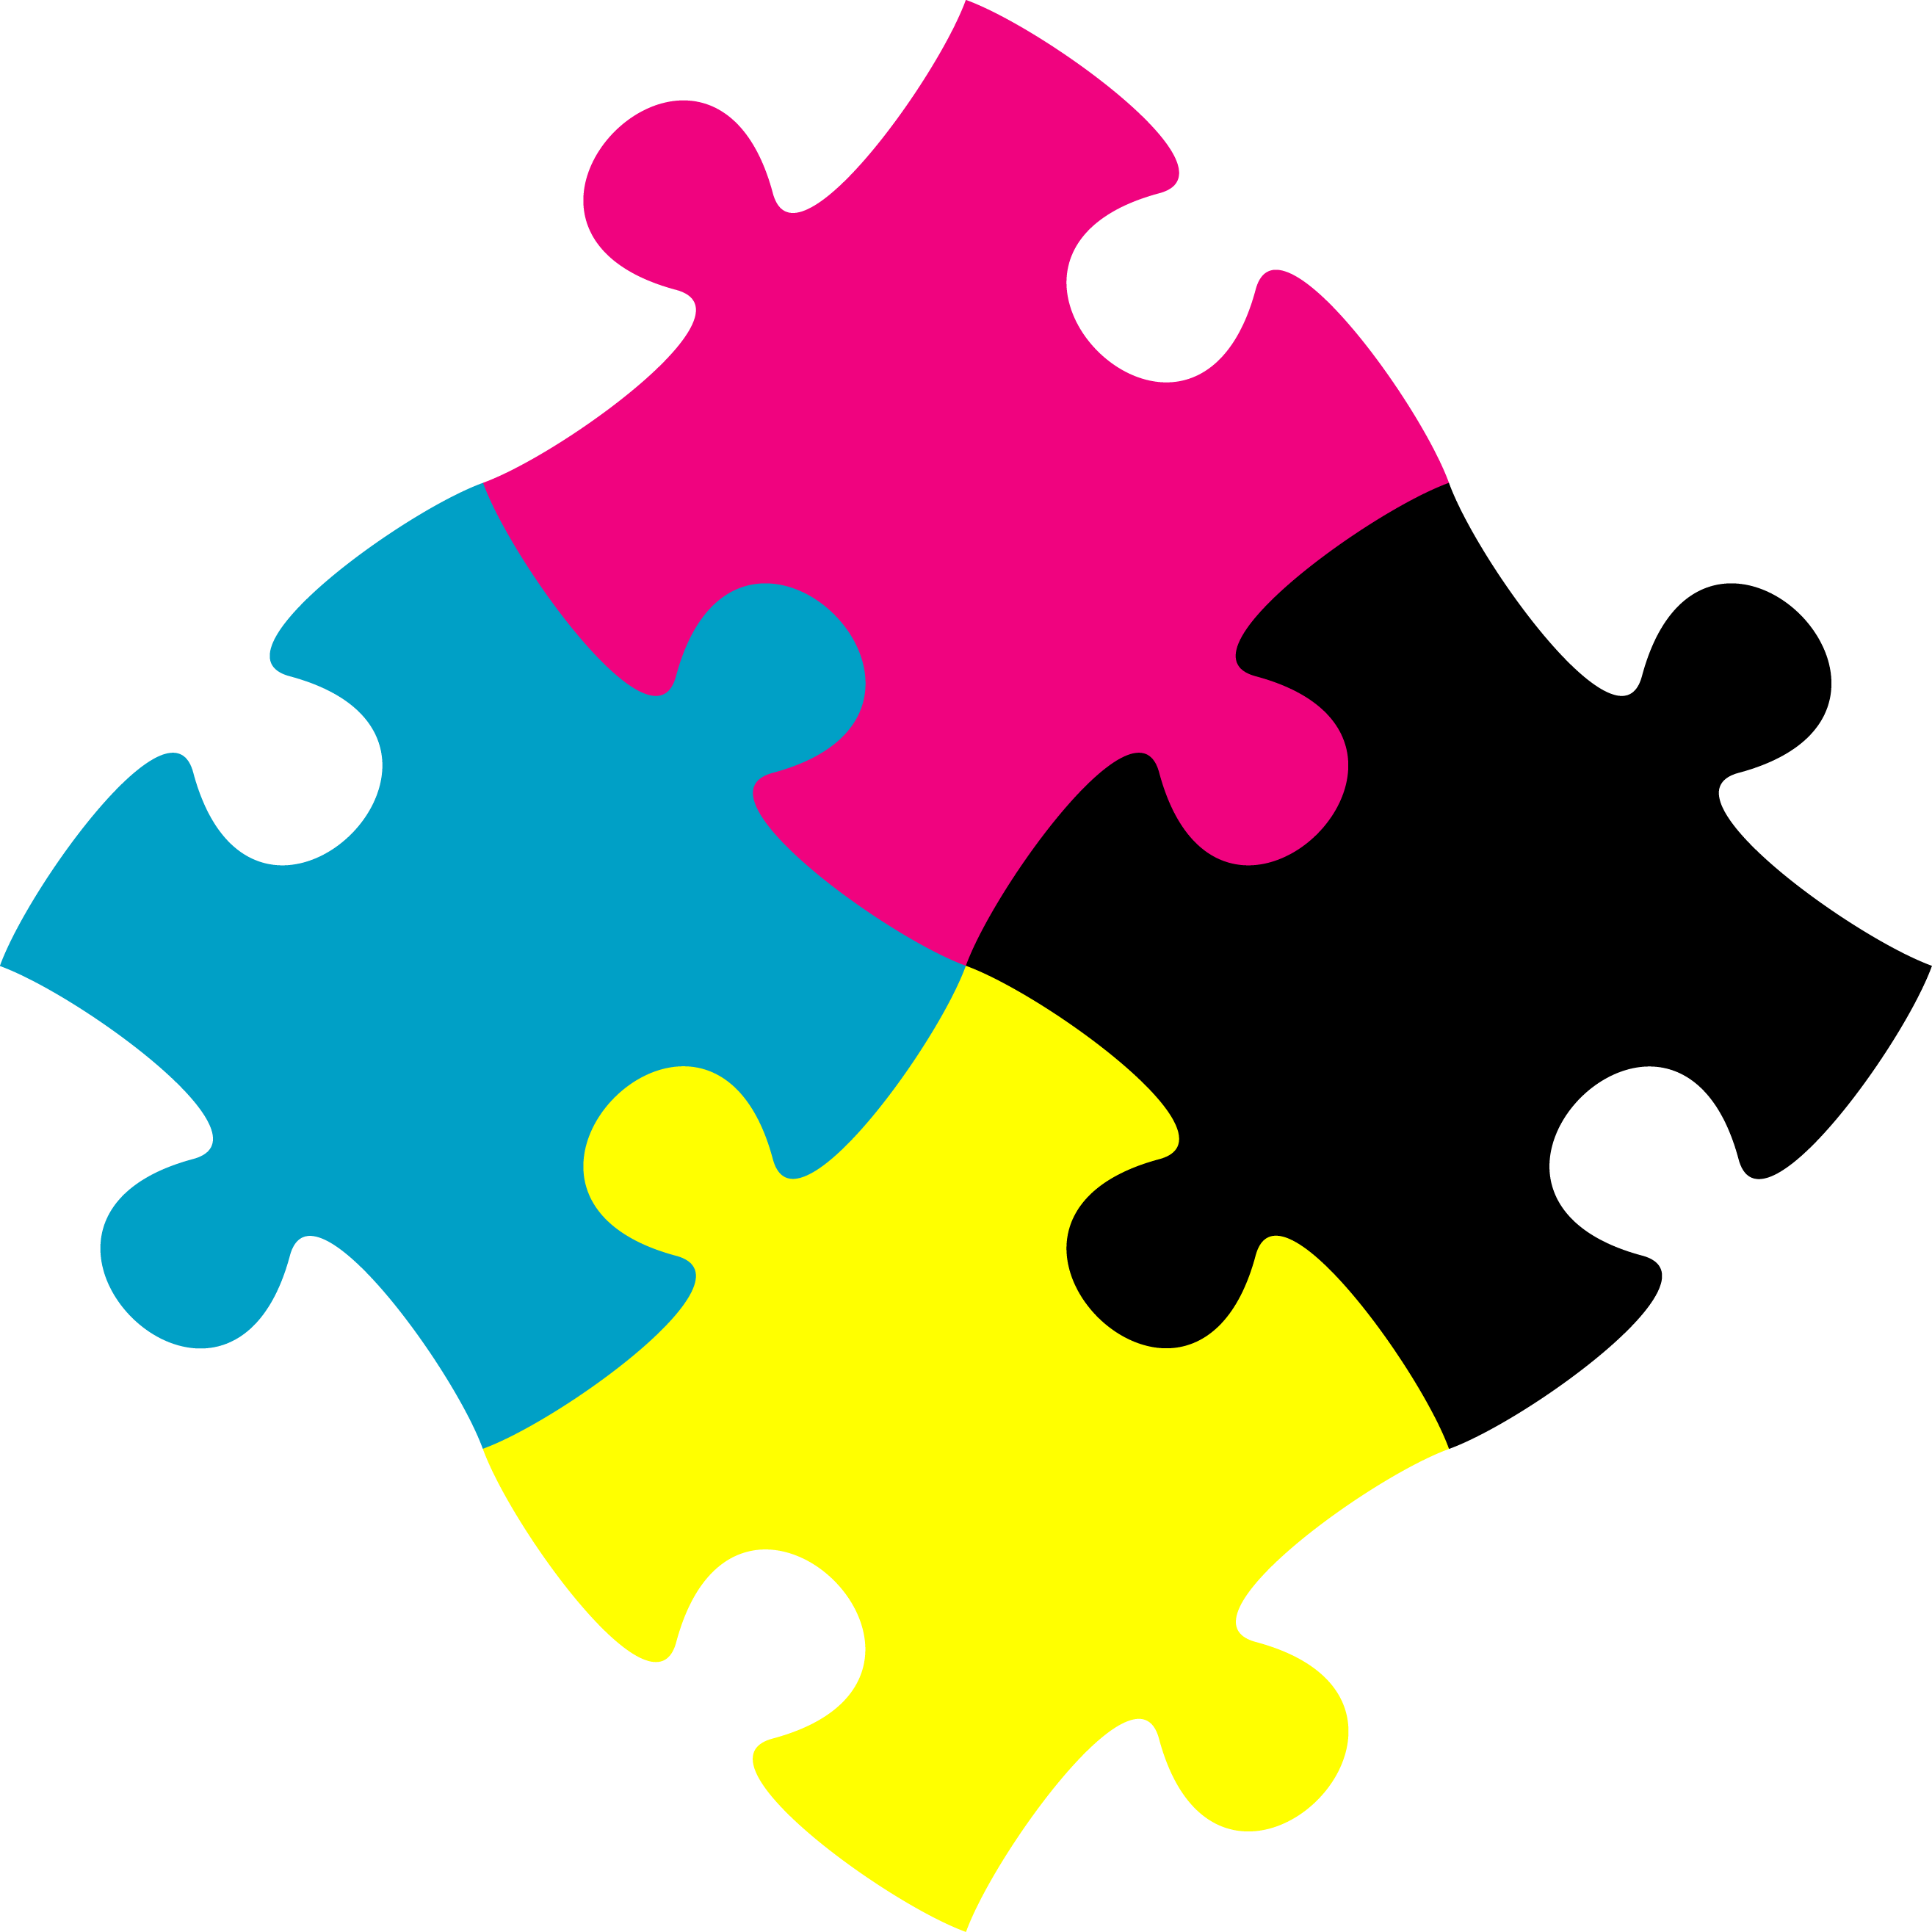 Png Jigsaw Puzzle - Jigsaw Puzzle Free Png Image, Transparent background PNG HD thumbnail